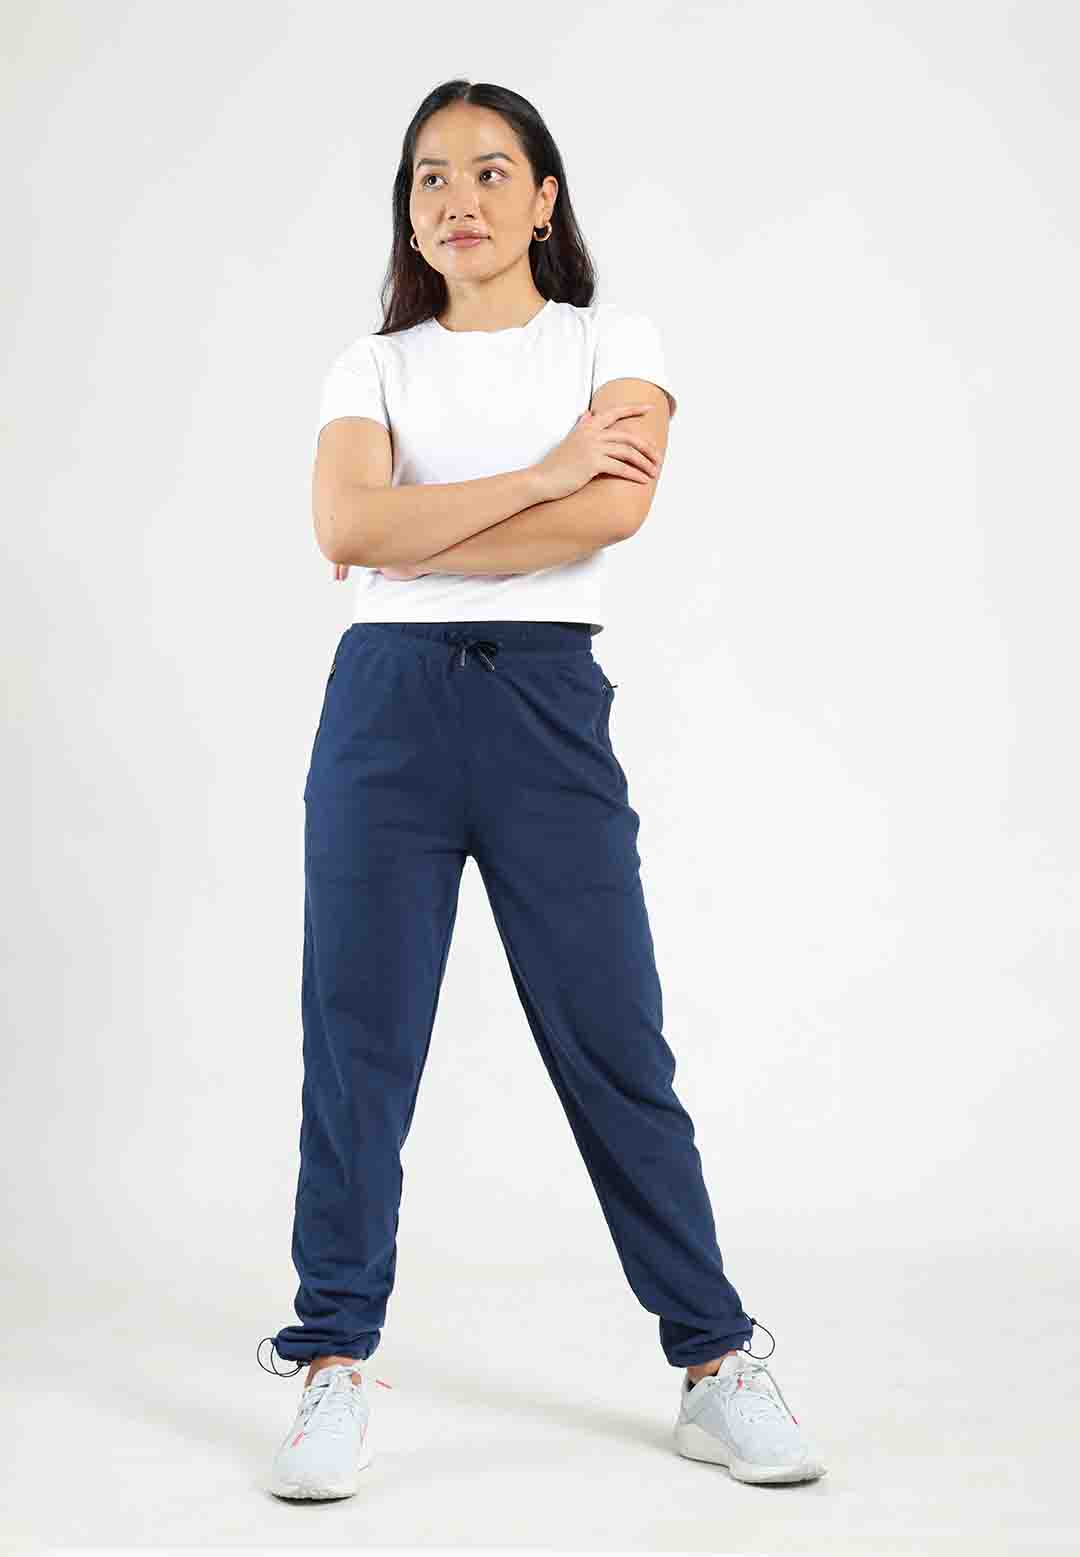 How to style sweatpants so you can wear them anywhere | BlissMark